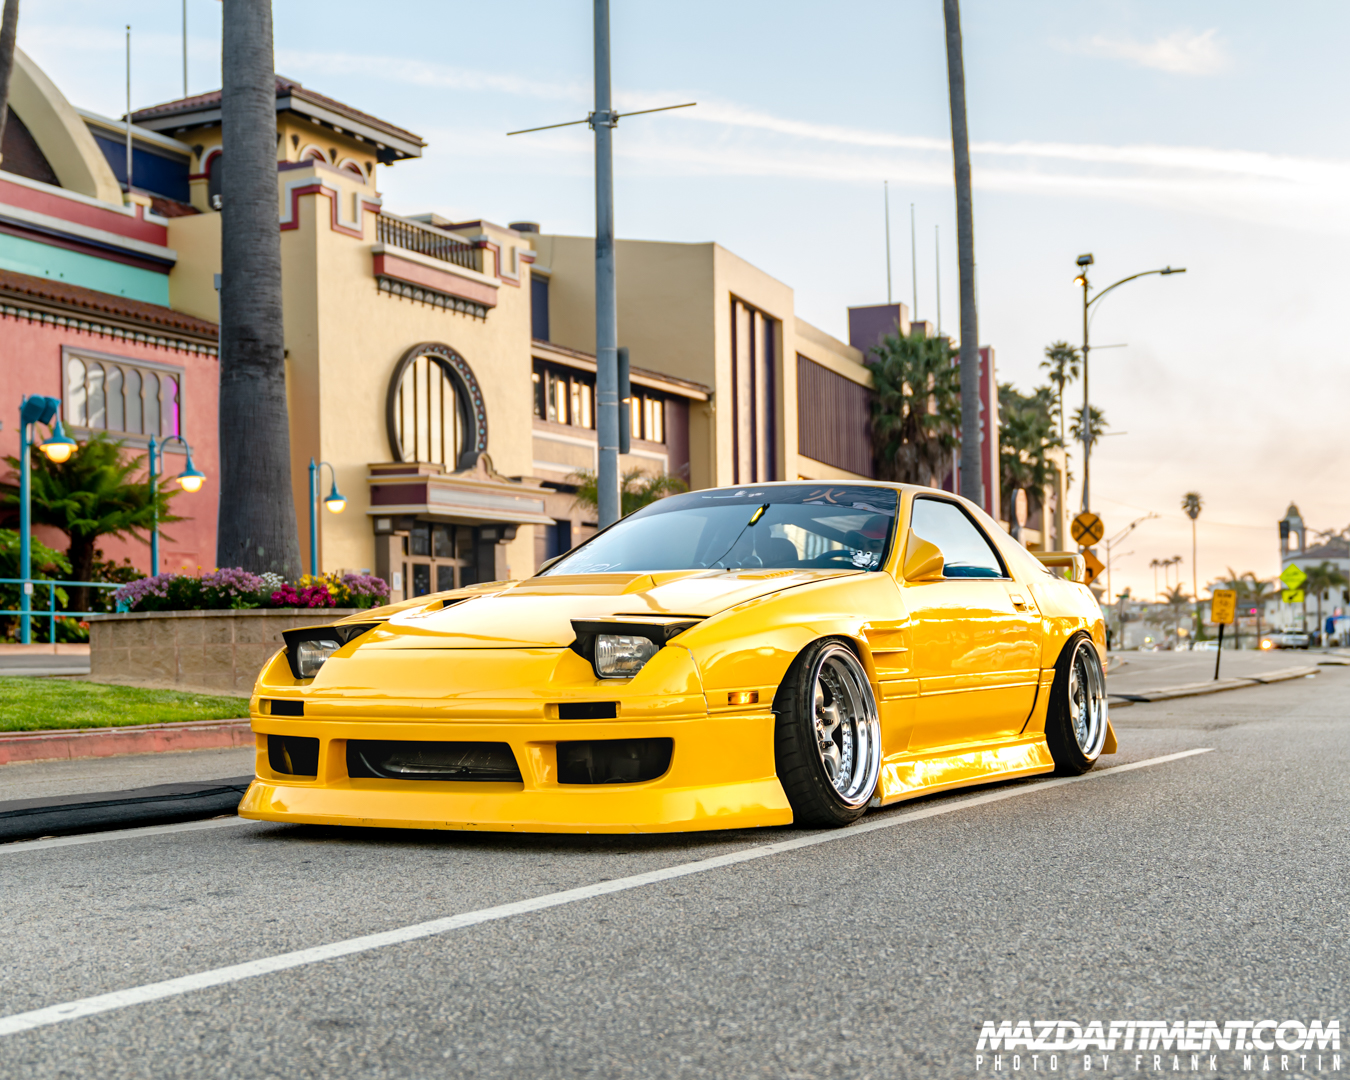 Drift Games - Josh's FC RX-7 looking particularly yellow